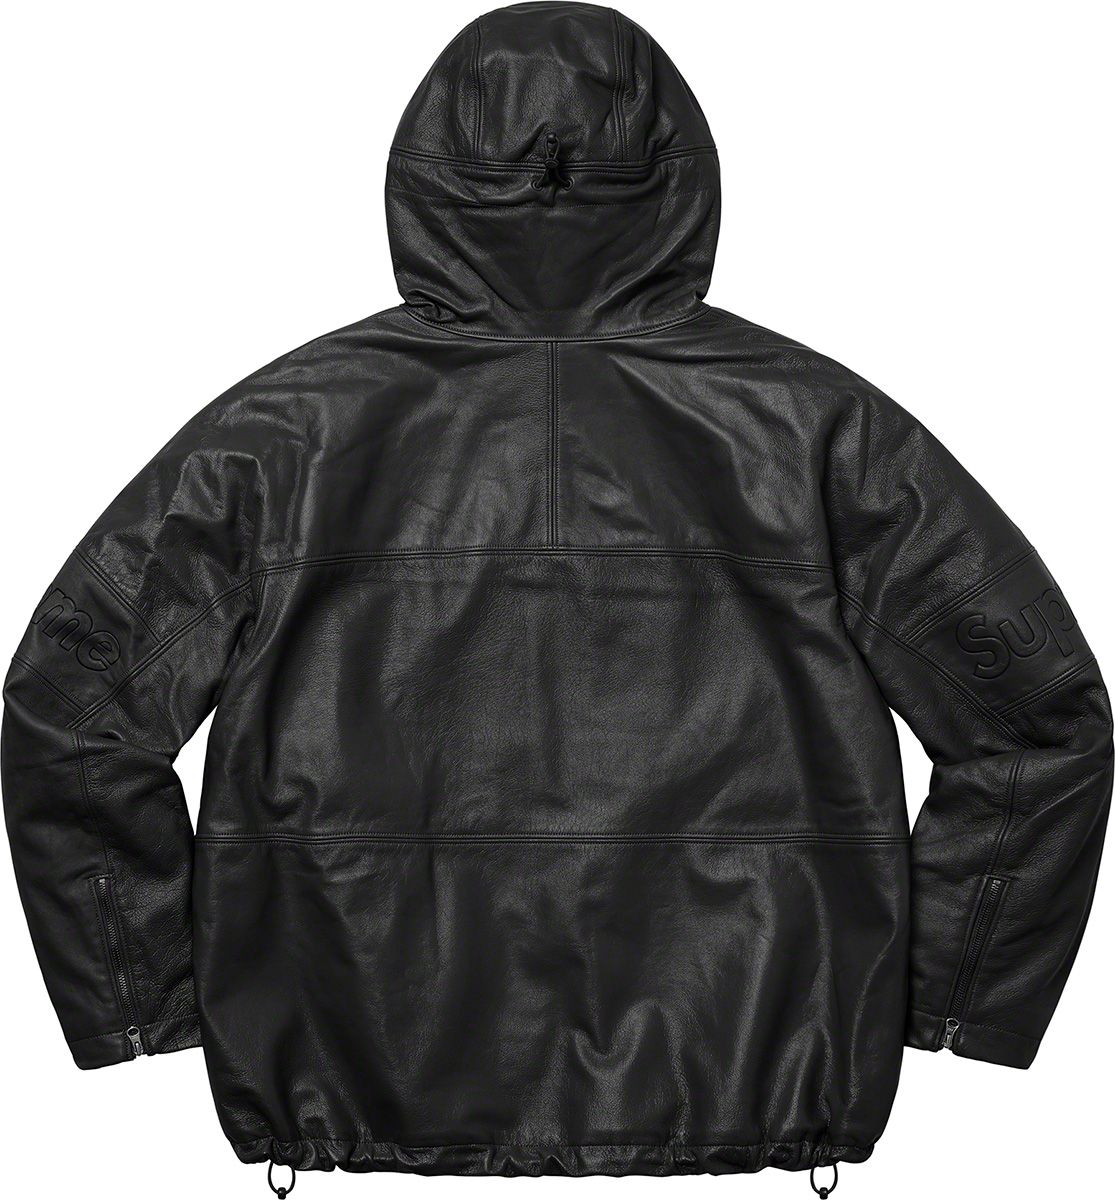 GORE-TEX Leather Jacket - Spring/Summer 2022 Preview – Supreme